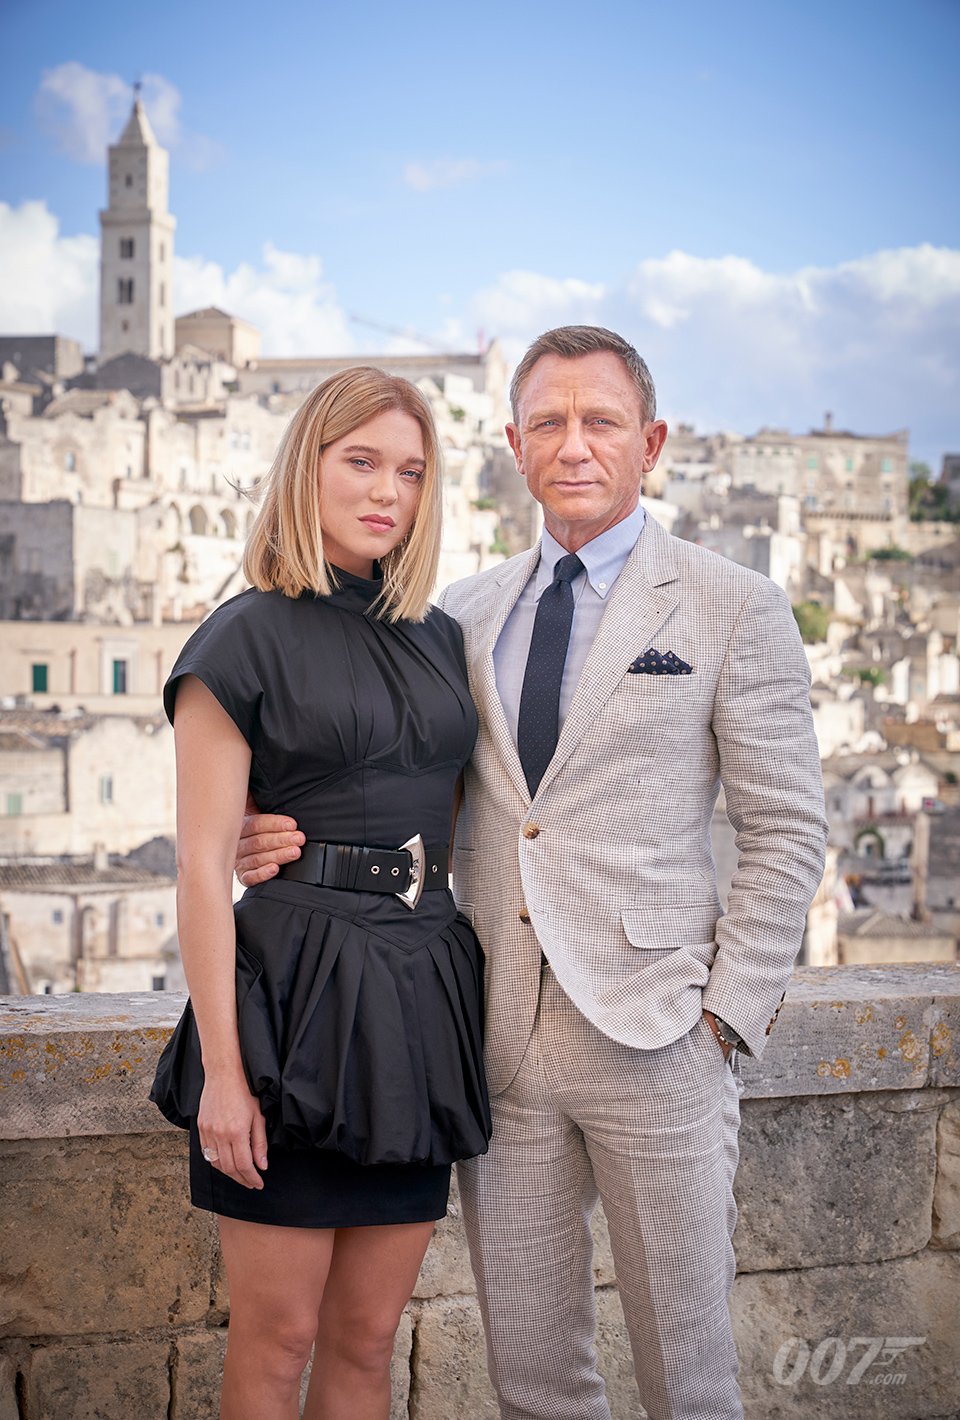 No Time To Die Will Complete Daniel Craig’s Emotional Evolution As 007